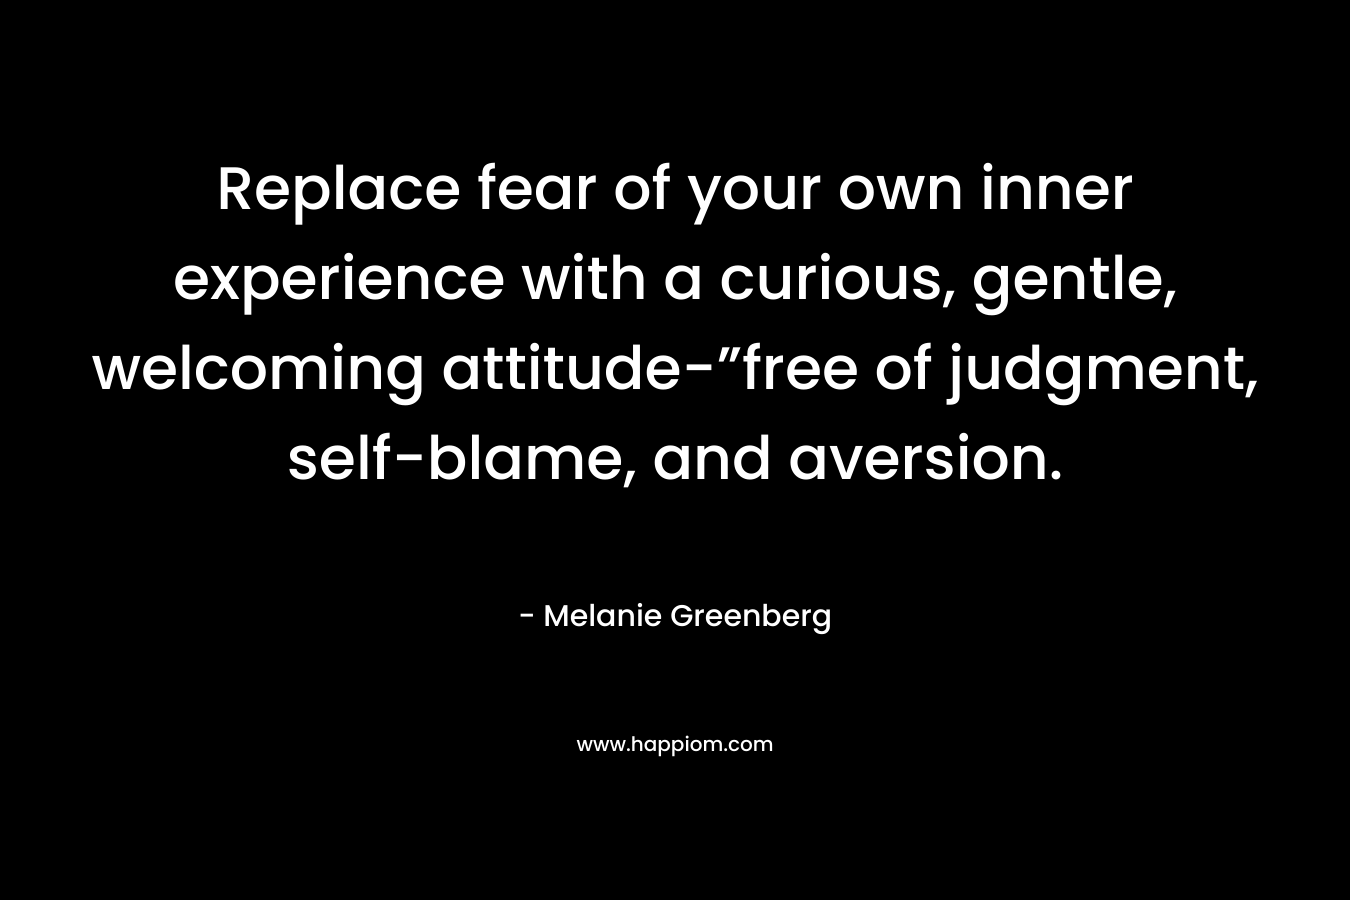 Replace fear of your own inner experience with a curious, gentle, welcoming attitude-”free of judgment, self-blame, and aversion. – Melanie Greenberg